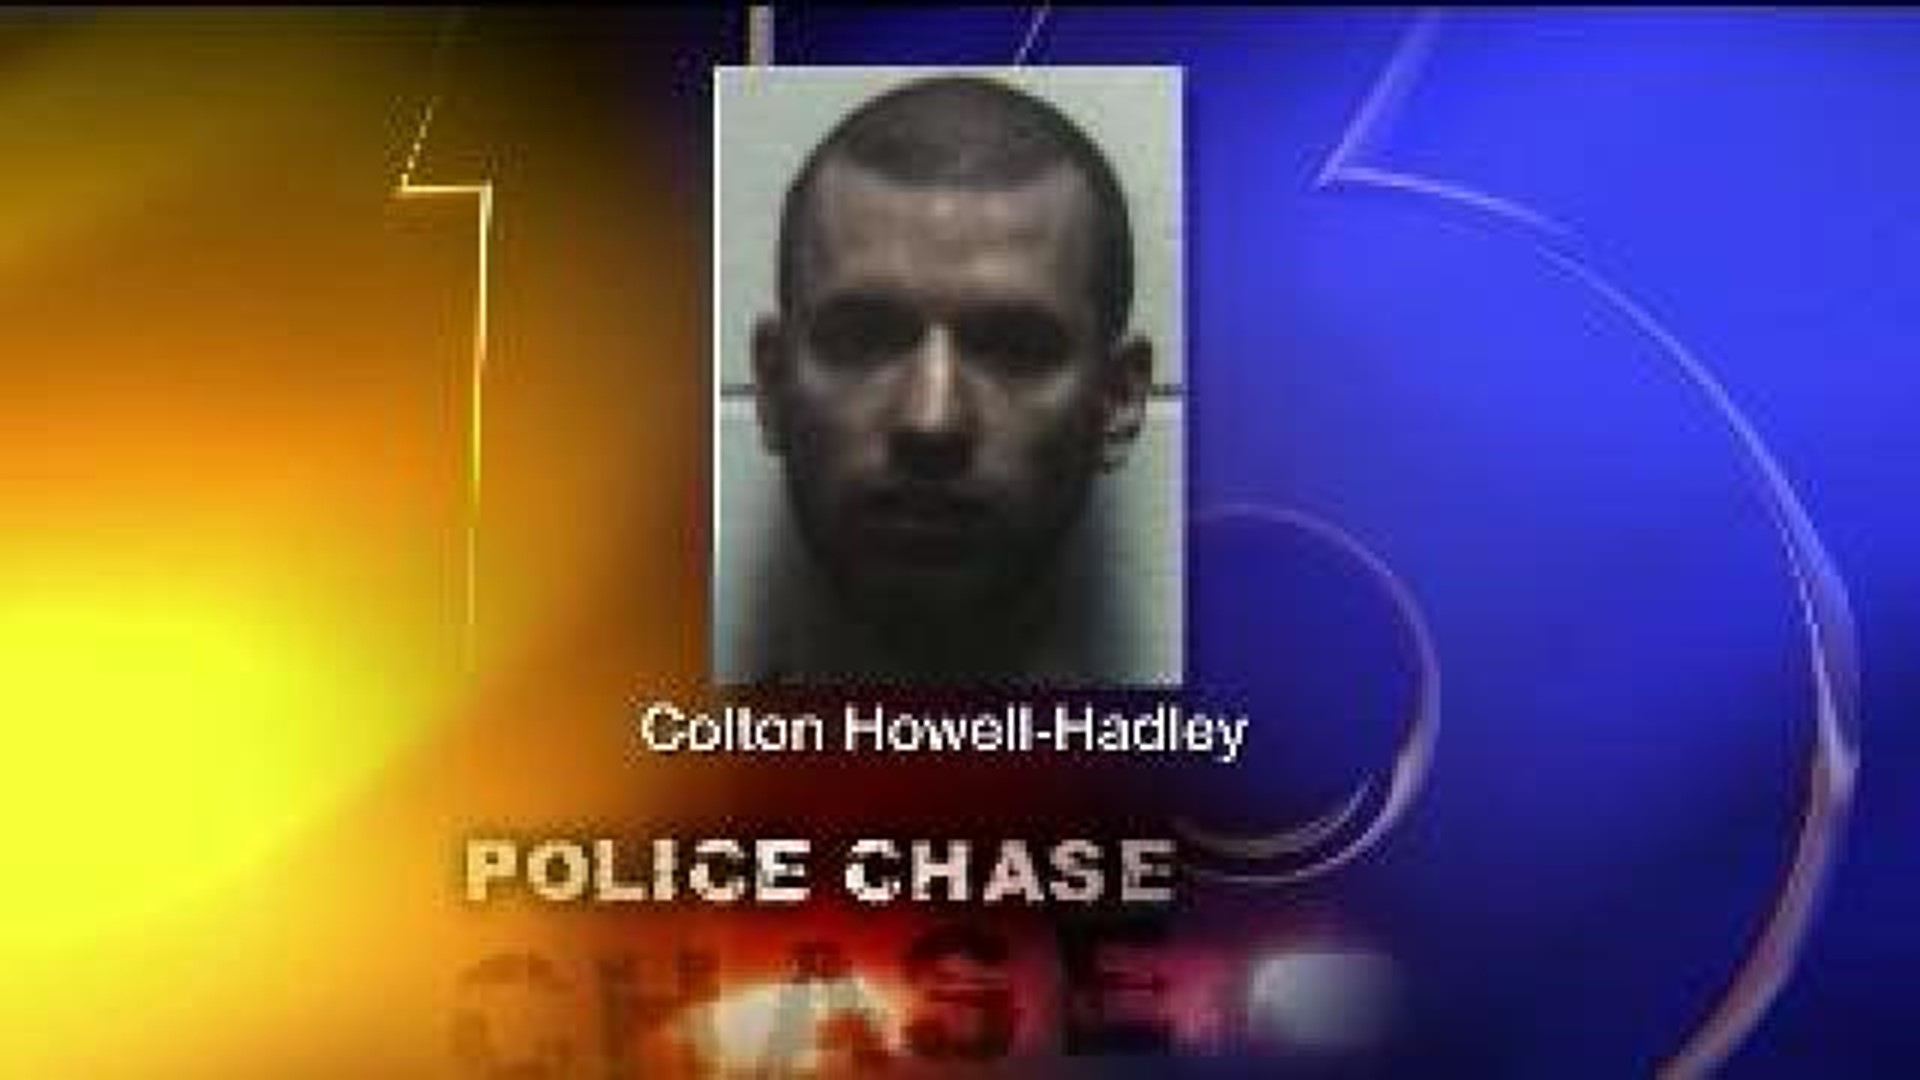 Man in Custody after Police Chase